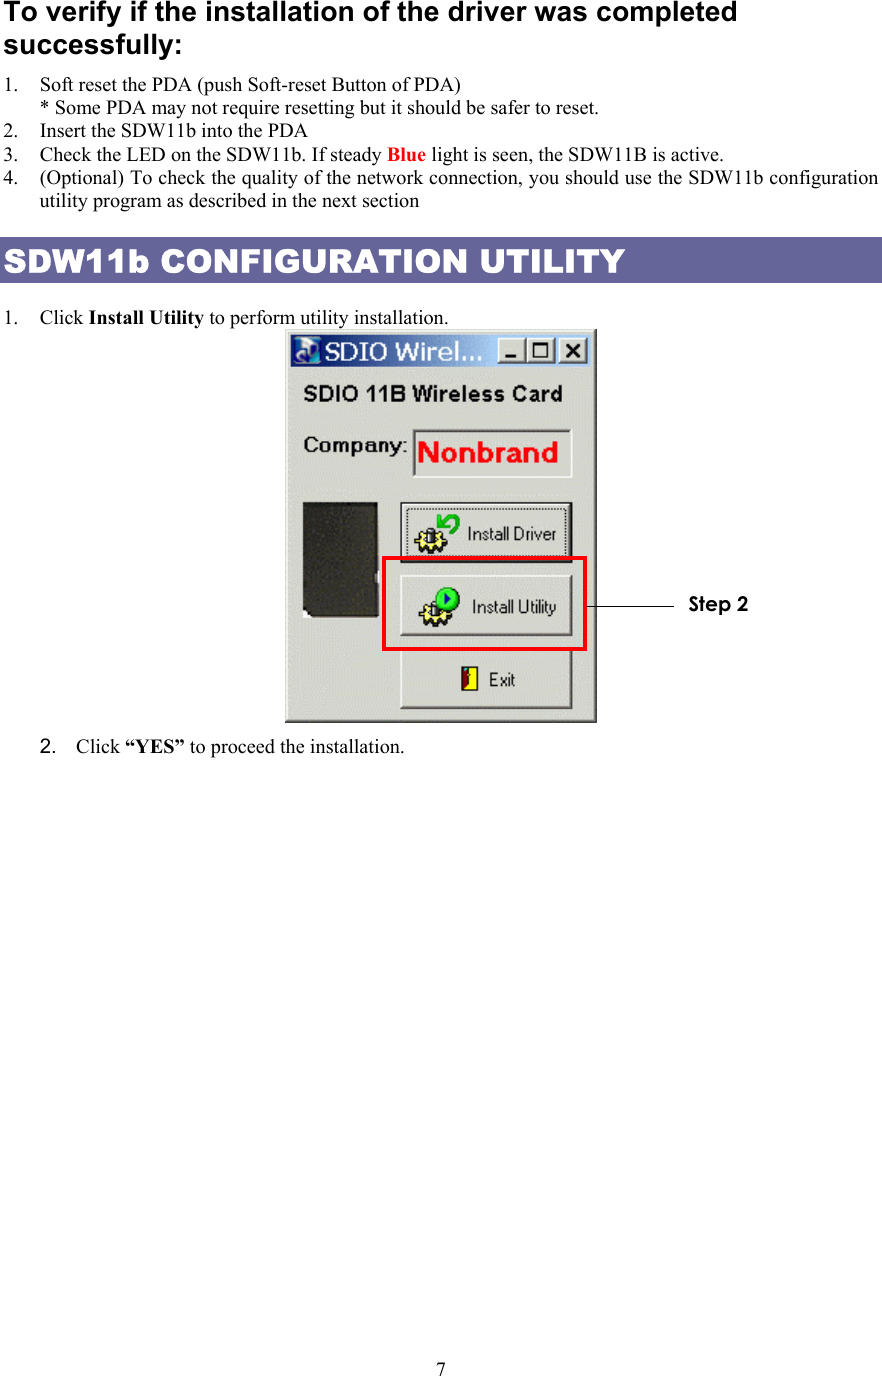  7To verify if the installation of the driver was completed successfully: 1.  Soft reset the PDA (push Soft-reset Button of PDA) * Some PDA may not require resetting but it should be safer to reset. 2.  Insert the SDW11b into the PDA 3.  Check the LED on the SDW11b. If steady Blue light is seen, the SDW11B is active. 4.  (Optional) To check the quality of the network connection, you should use the SDW11b configuration utility program as described in the next section SDW11b CONFIGURATION UTILITY  1. Click Install Utility to perform utility installation.    2.  Click “YES” to proceed the installation. Step 2 